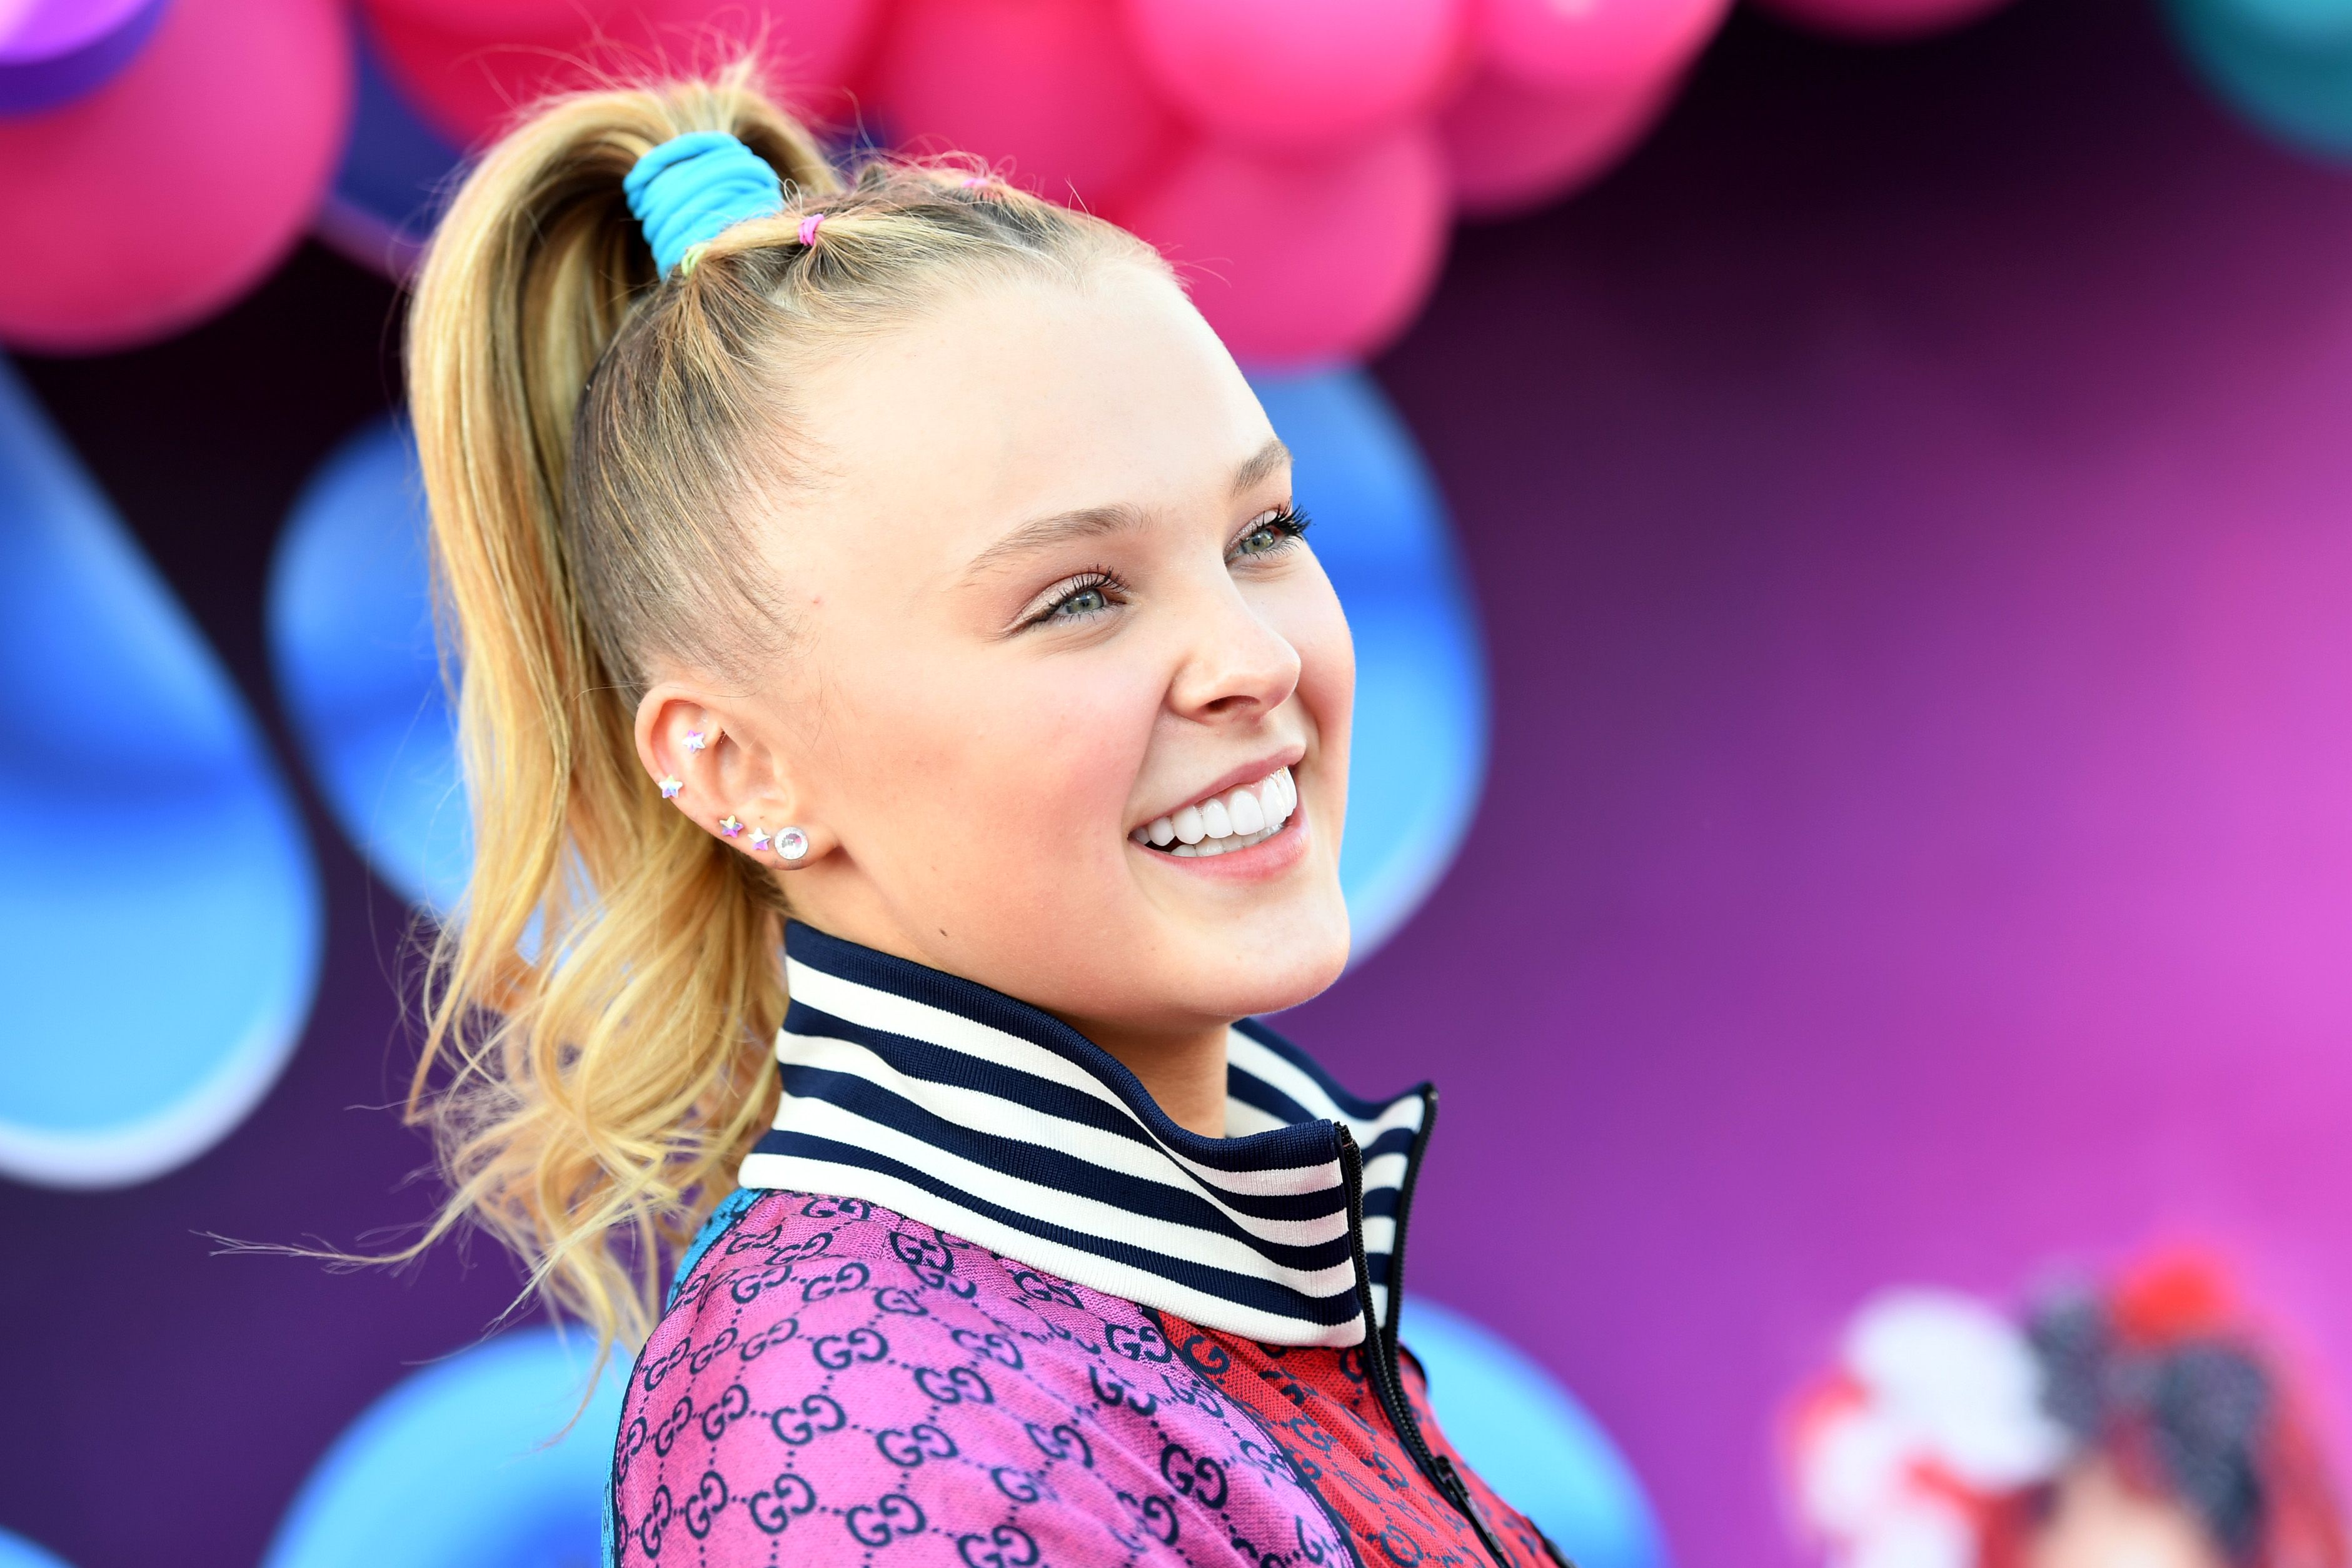 The Masked Singer's JoJo Siwa ditches ponytail for pixie cut